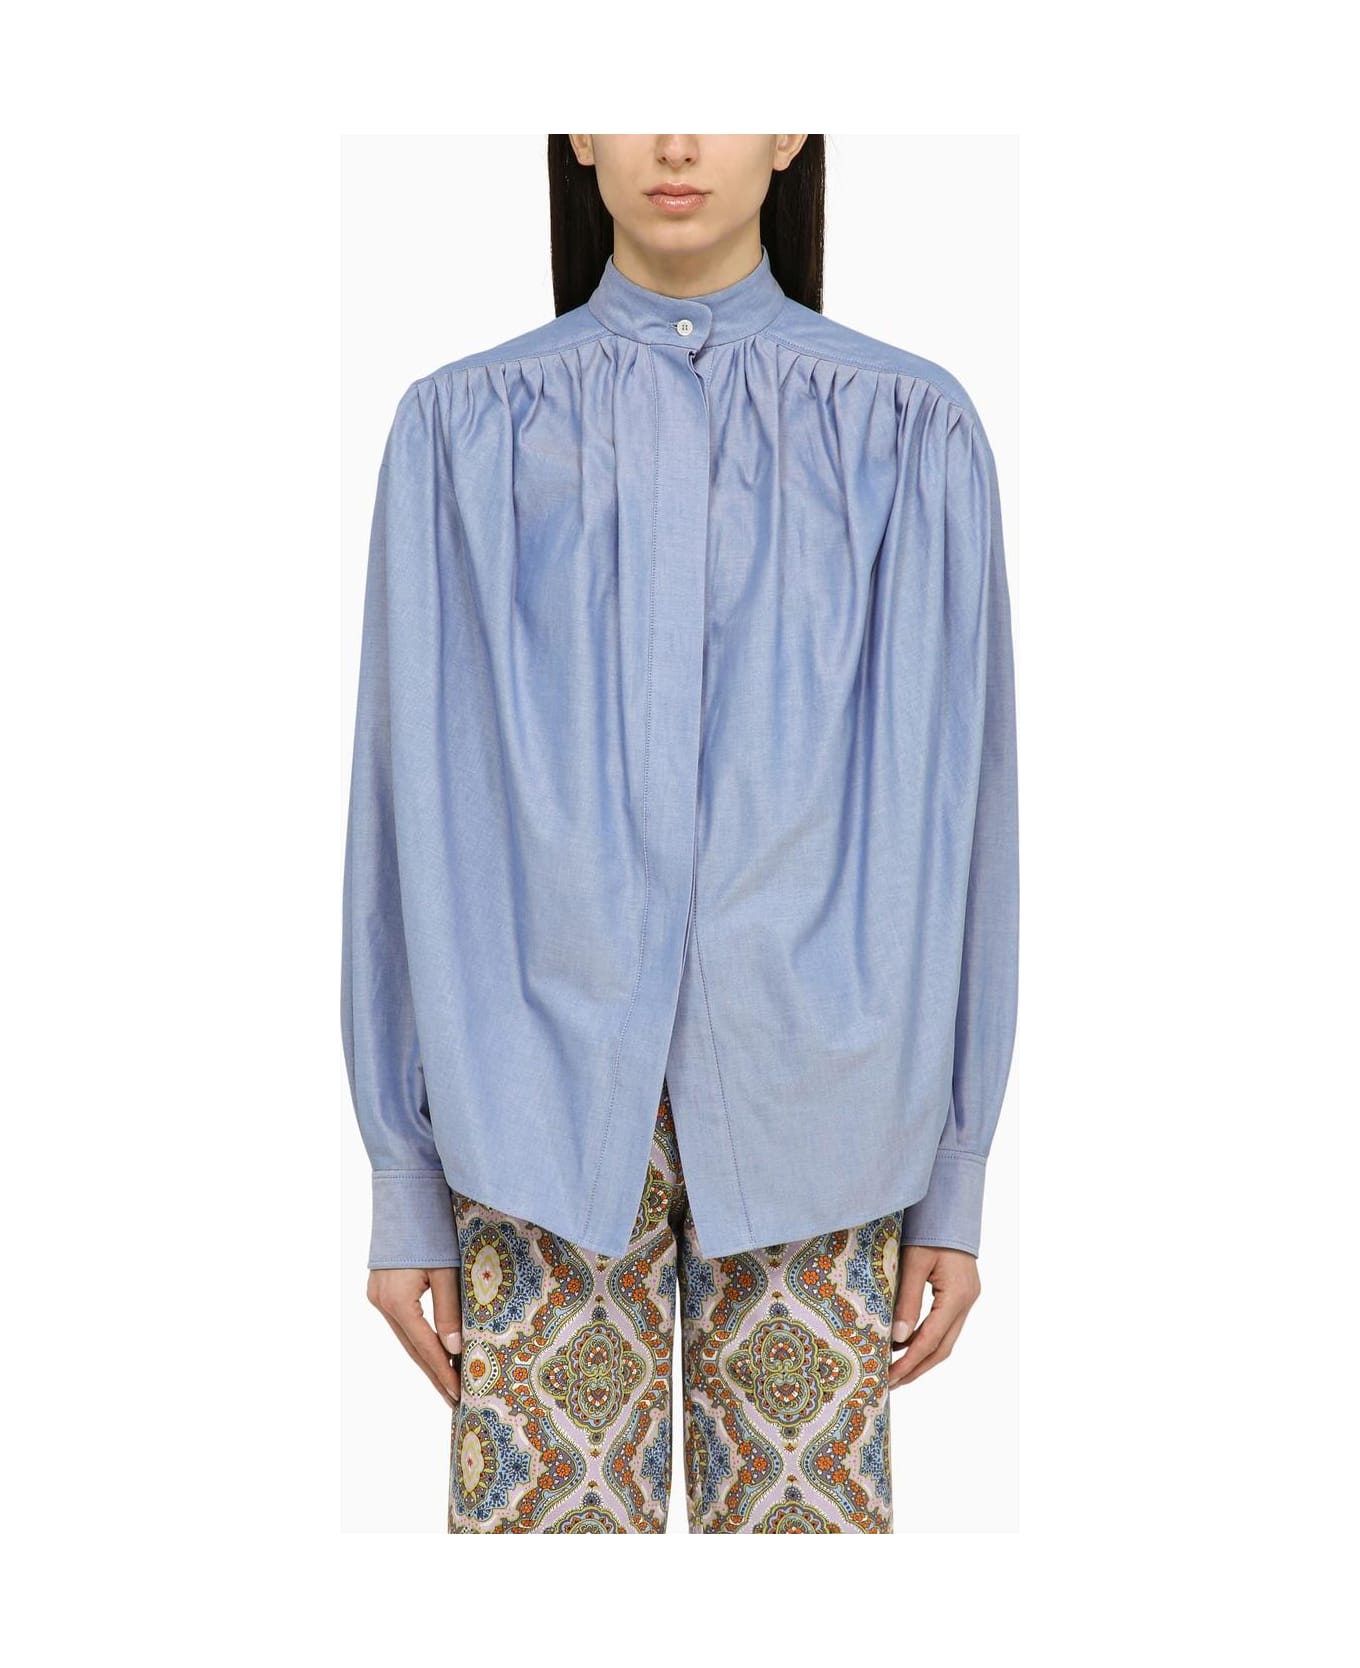 Etro Light Blue Cotton Blouse With Ruffled Pattern